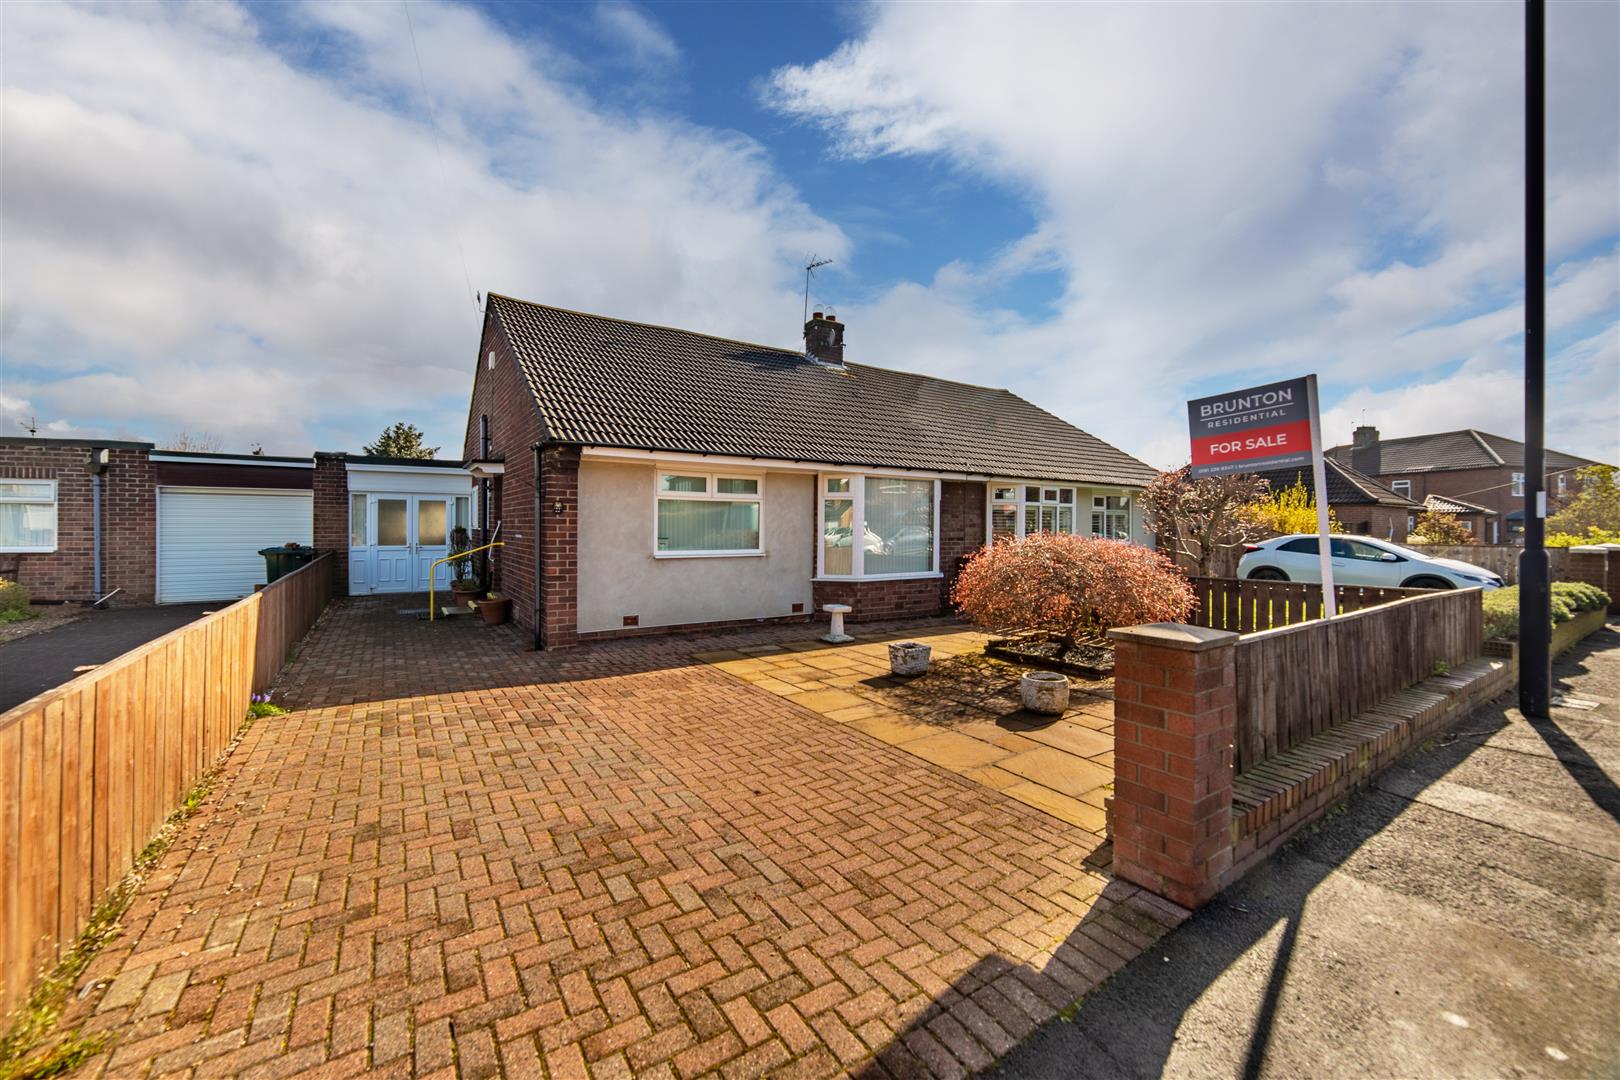 2 bed semi-detached bungalow for sale in Polwarth Drive, Brunton Park - Property Image 1